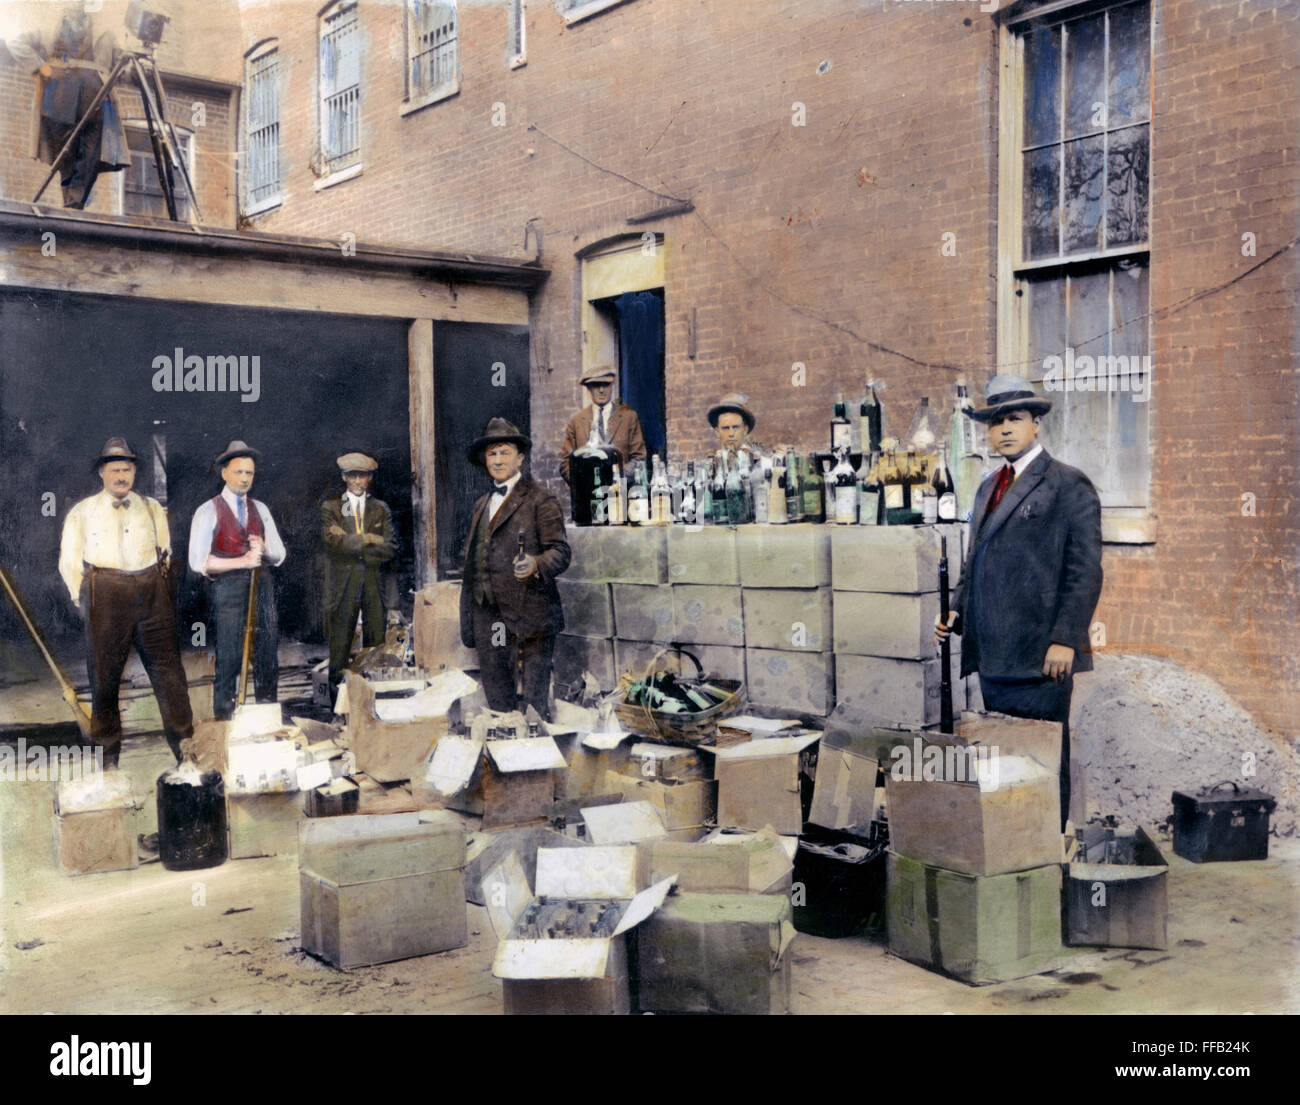 PROHIBITION, 1922. /nRevenue agents with confiscated bootleg liquor at Washington, D.C. Oil over a photograph, 1922. Stock Photo